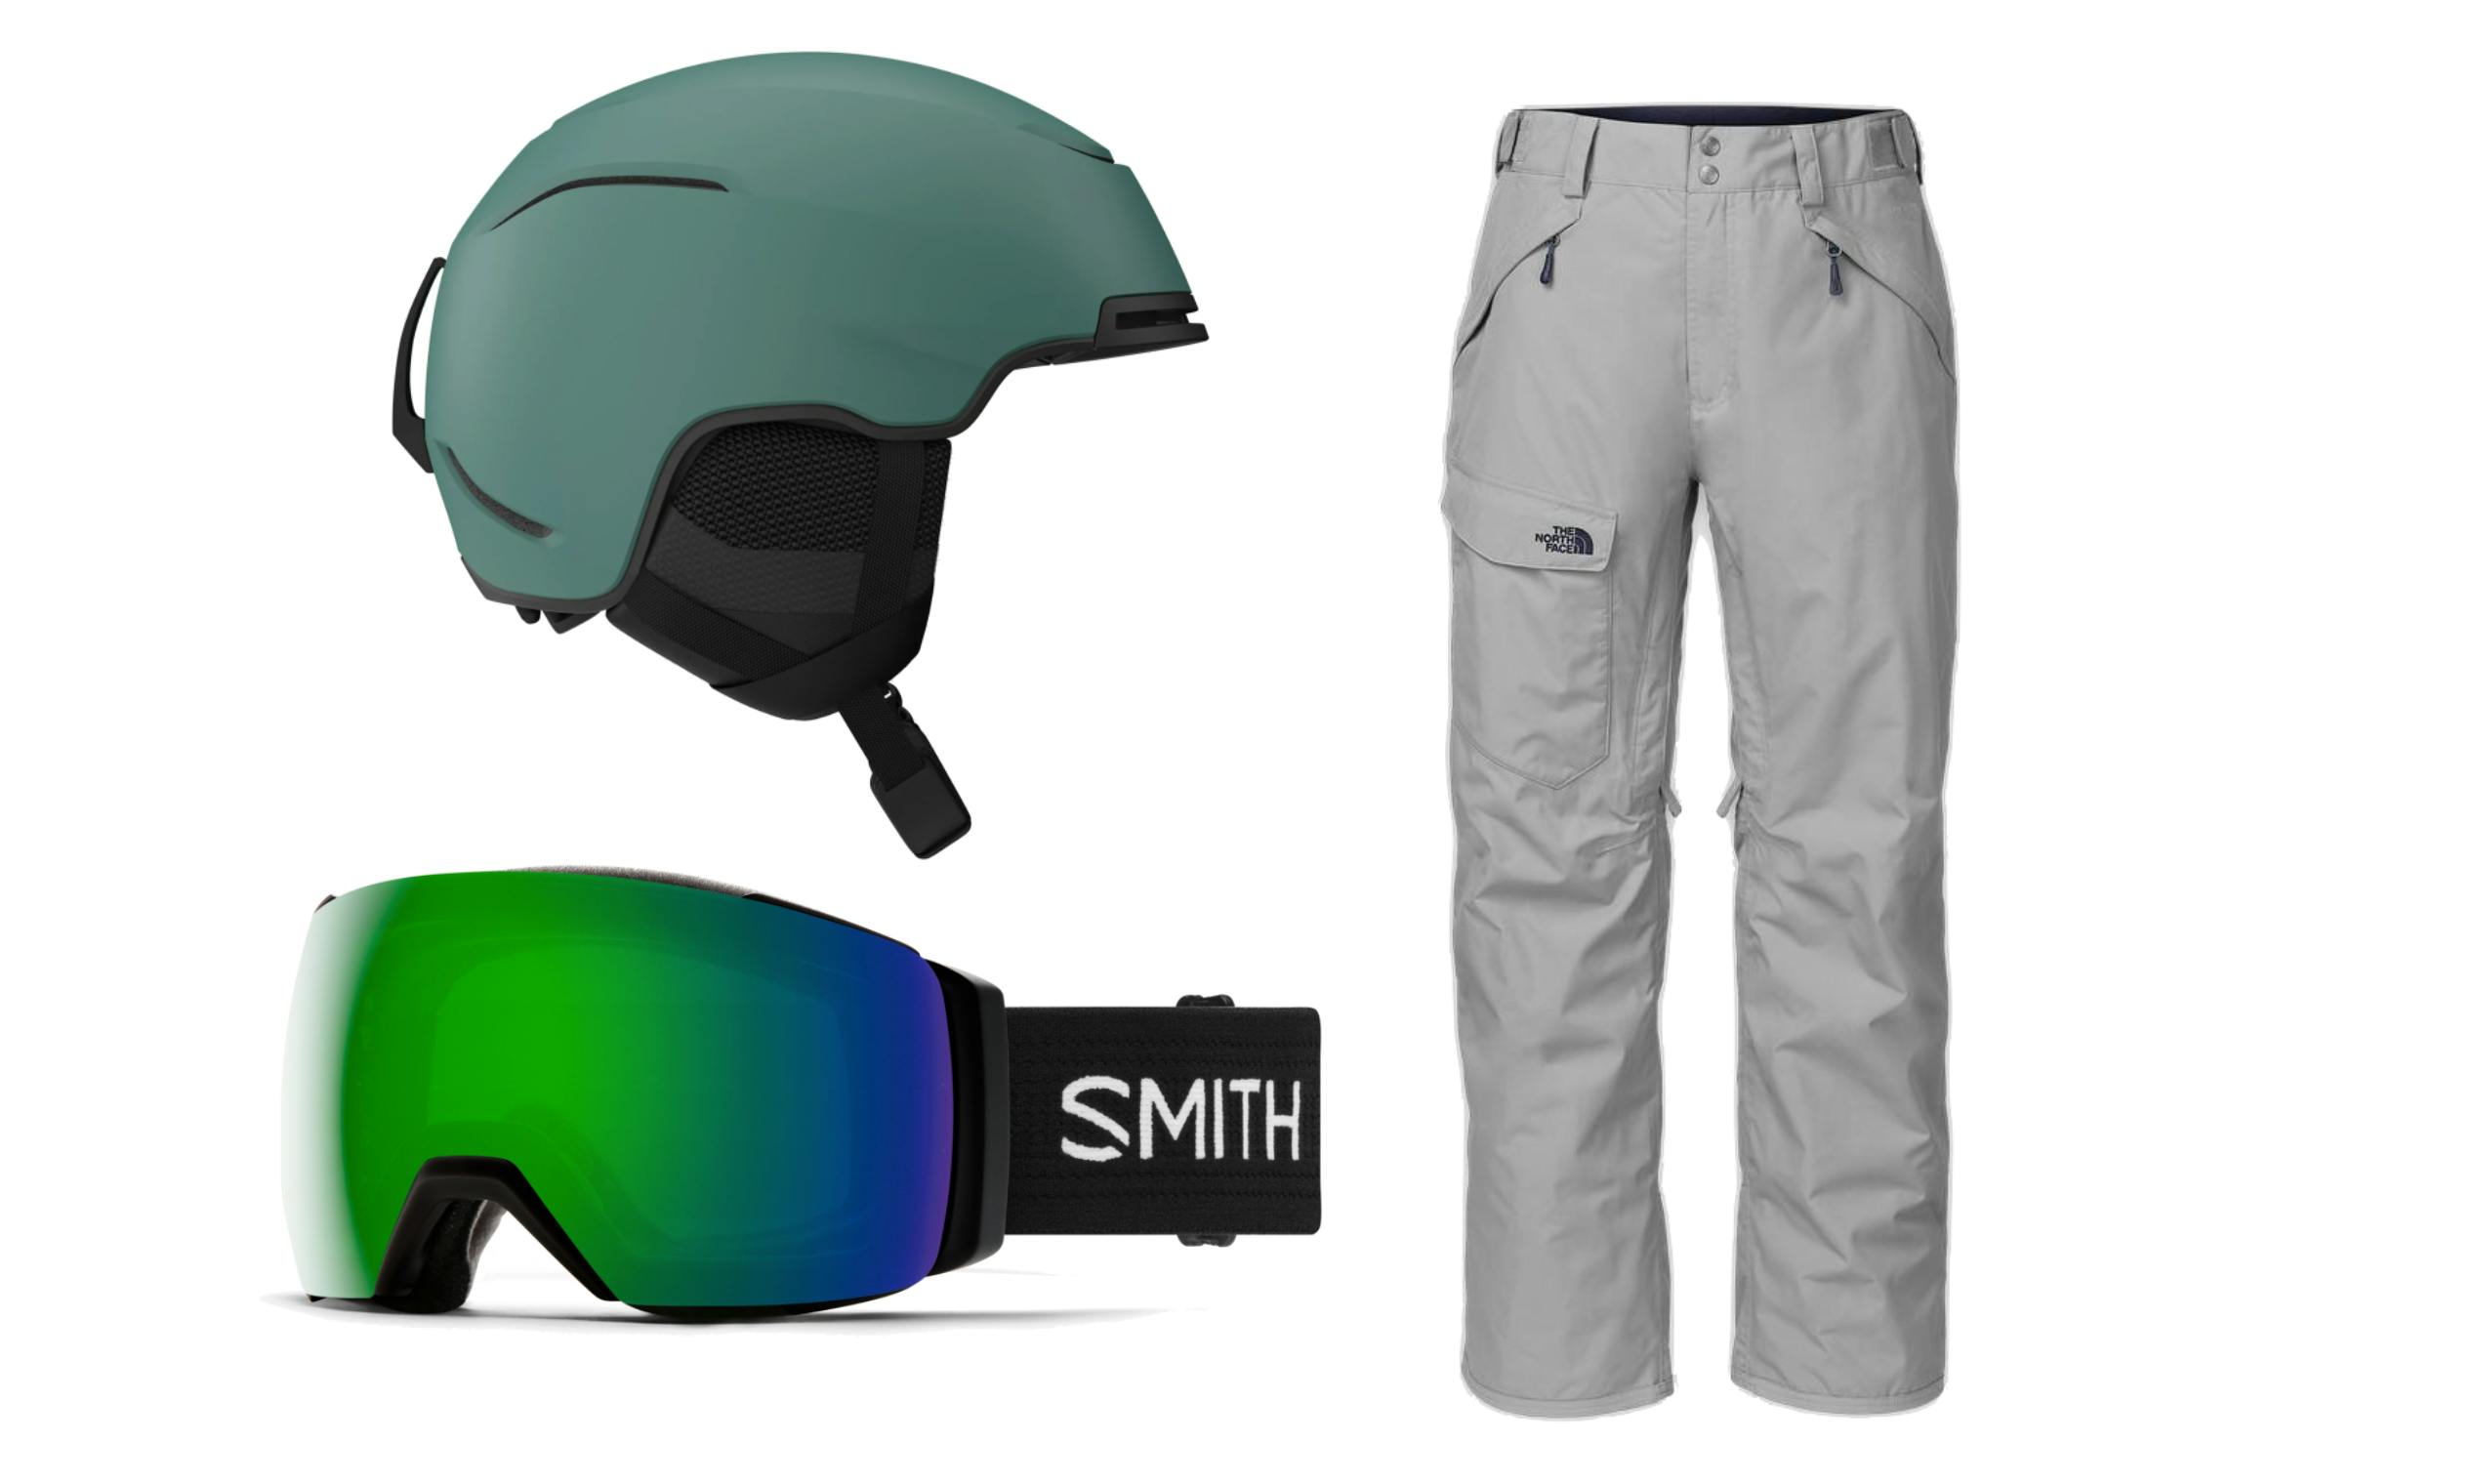 Product images of the Giro Jackson MIPS Helmet, the The North Face Men's Freedom Insulated Pants, and the Smith I/O MAG XL Goggles. 